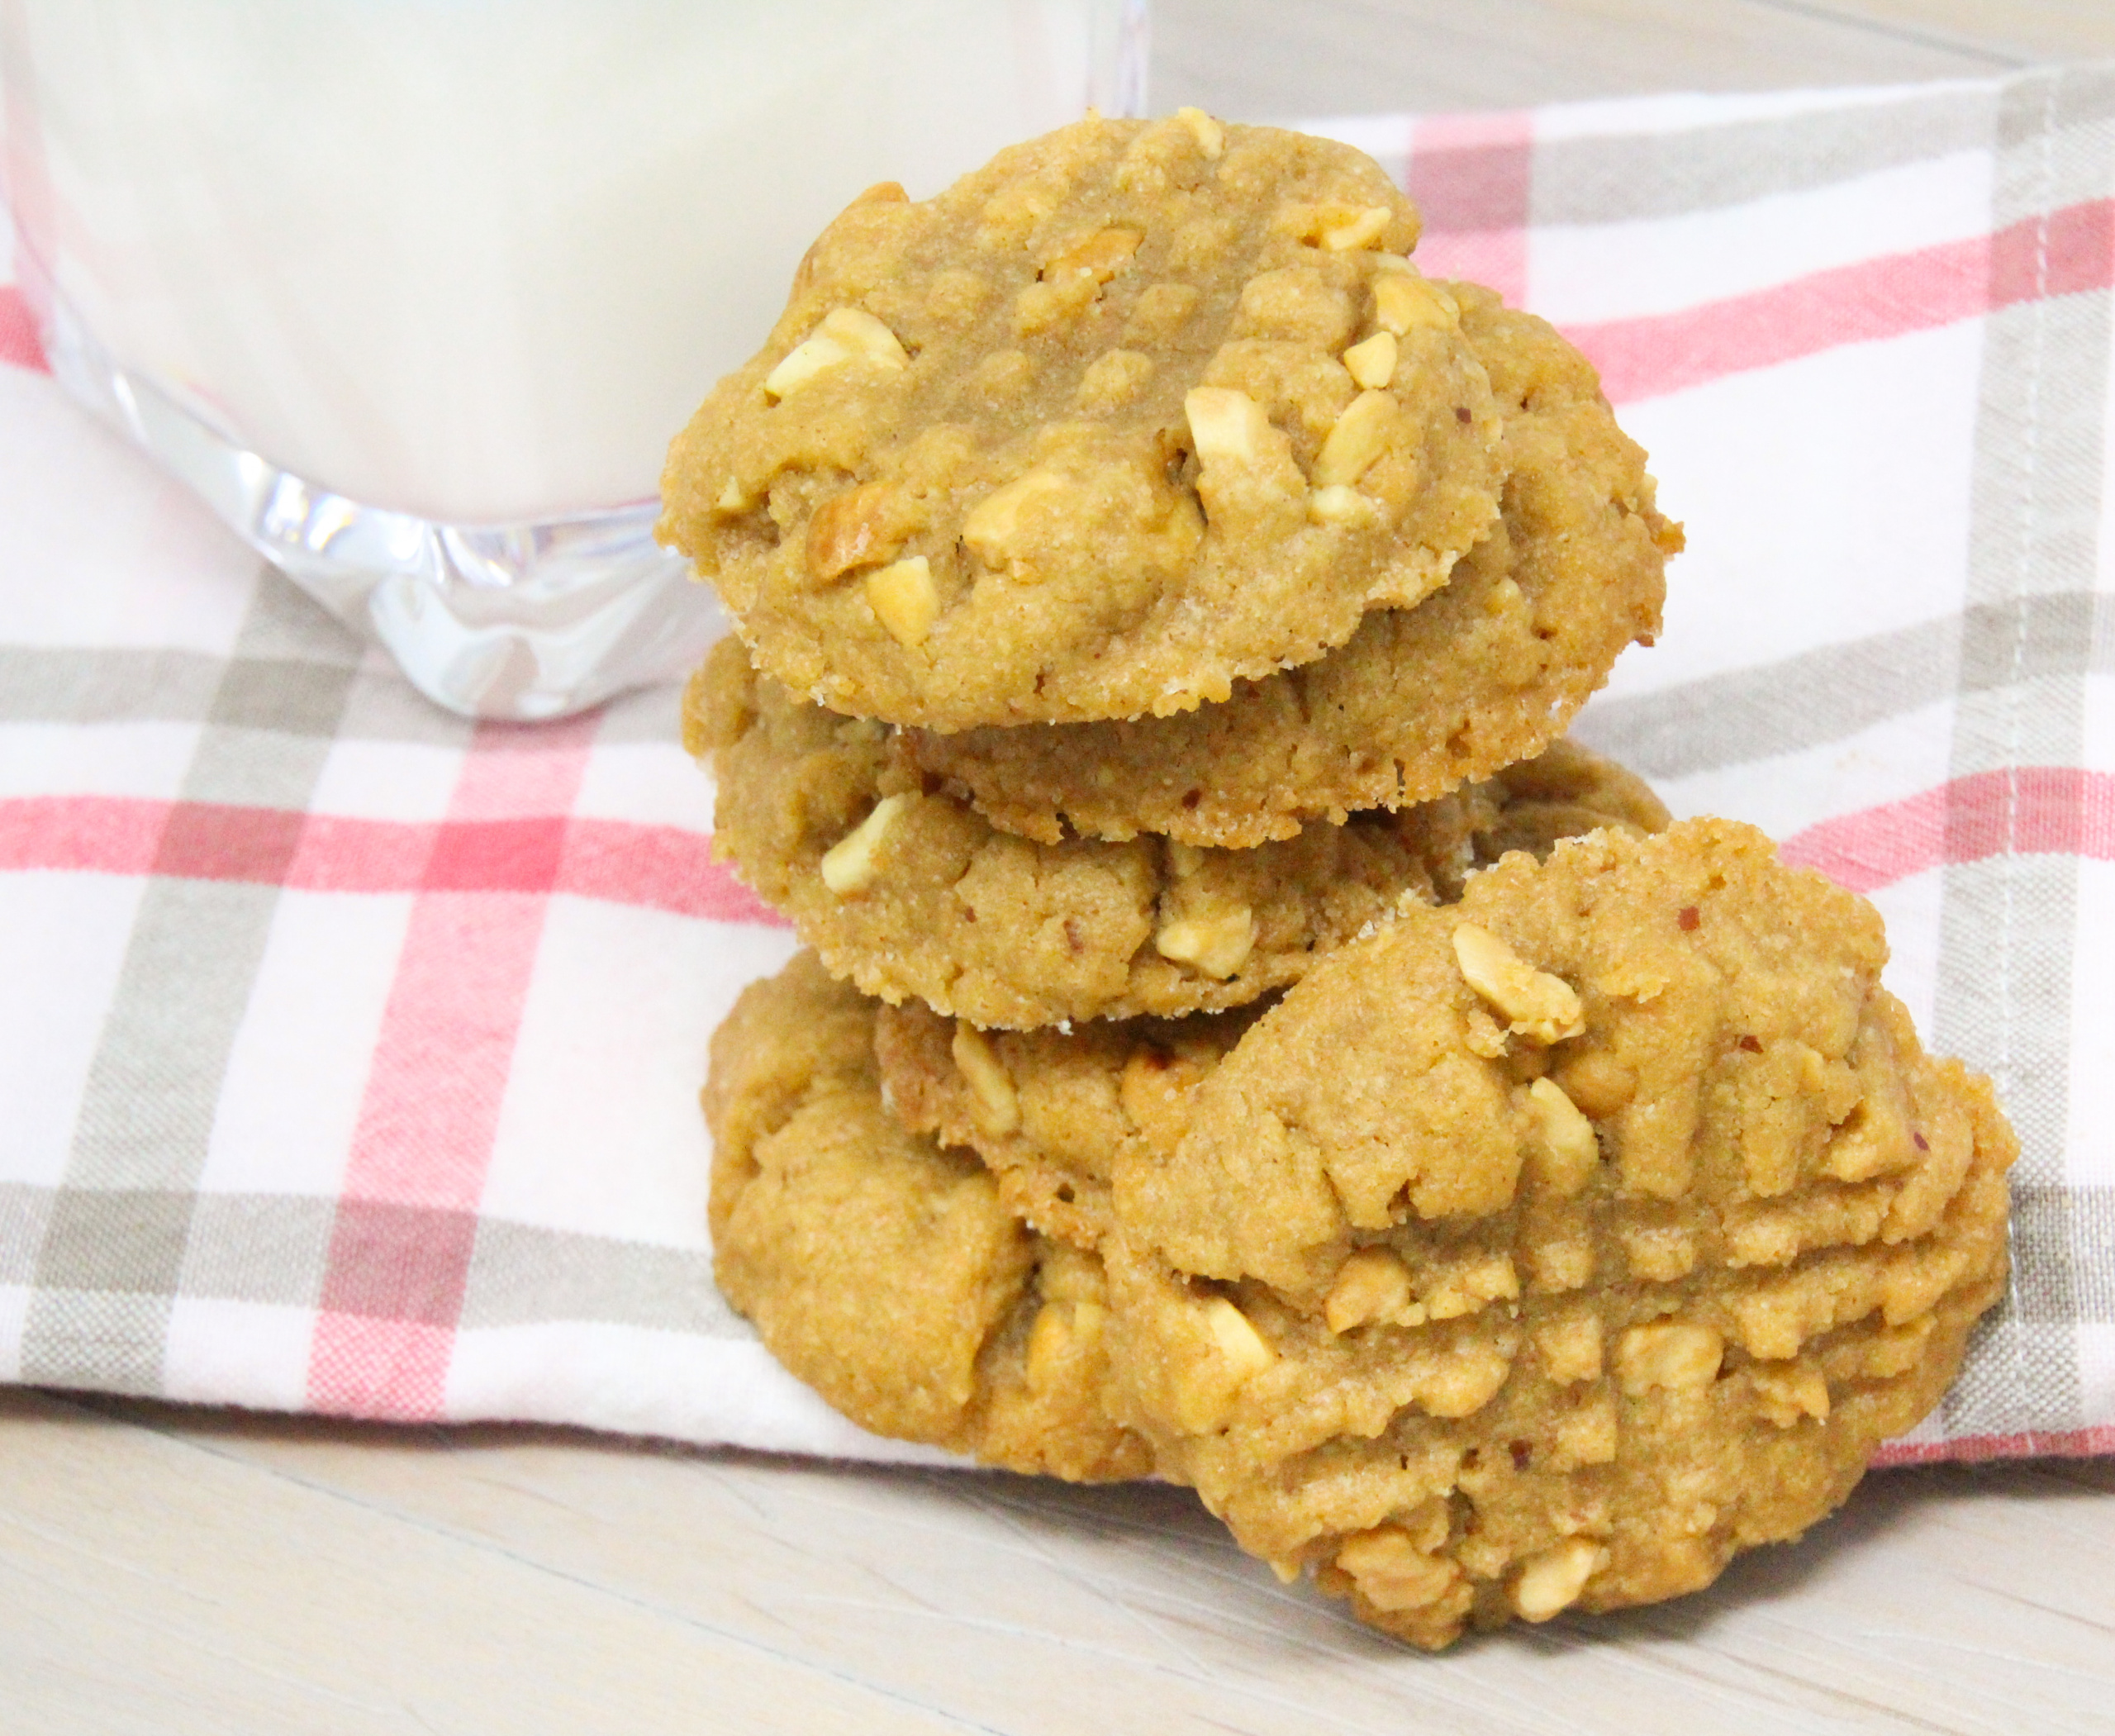 Using only four ingredients and NO flour, these easy peanut butter cookies are naturally gluten-free and are crispy on the edges and chewy on the insides. Recipe shared with permission granted by Valerie Burns, author of MURDER IS A PIECE OF CAKE. 